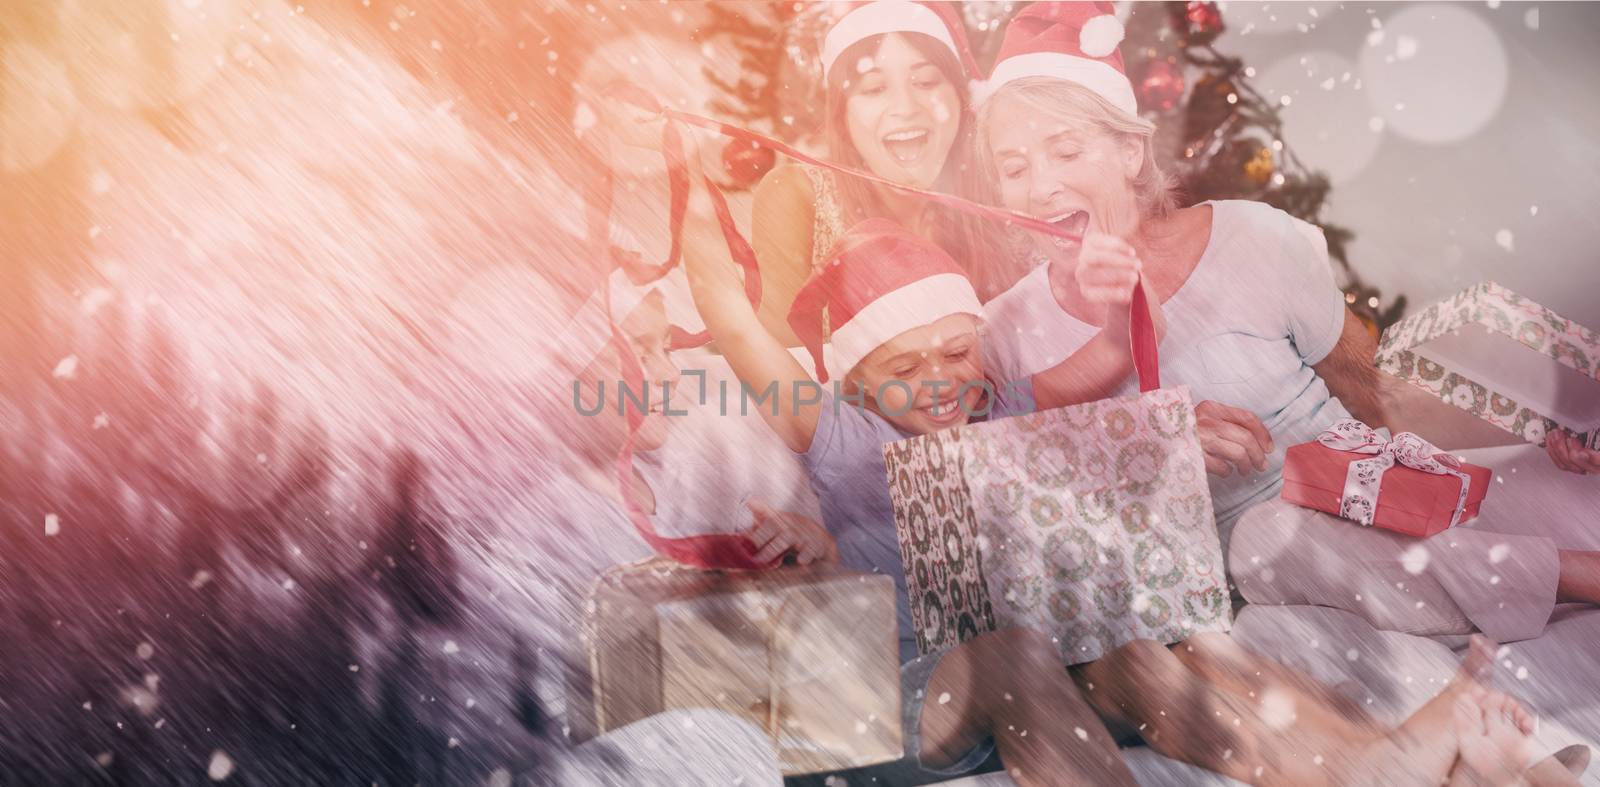 Composite image of happy family at christmas opening gifts together by Wavebreakmedia